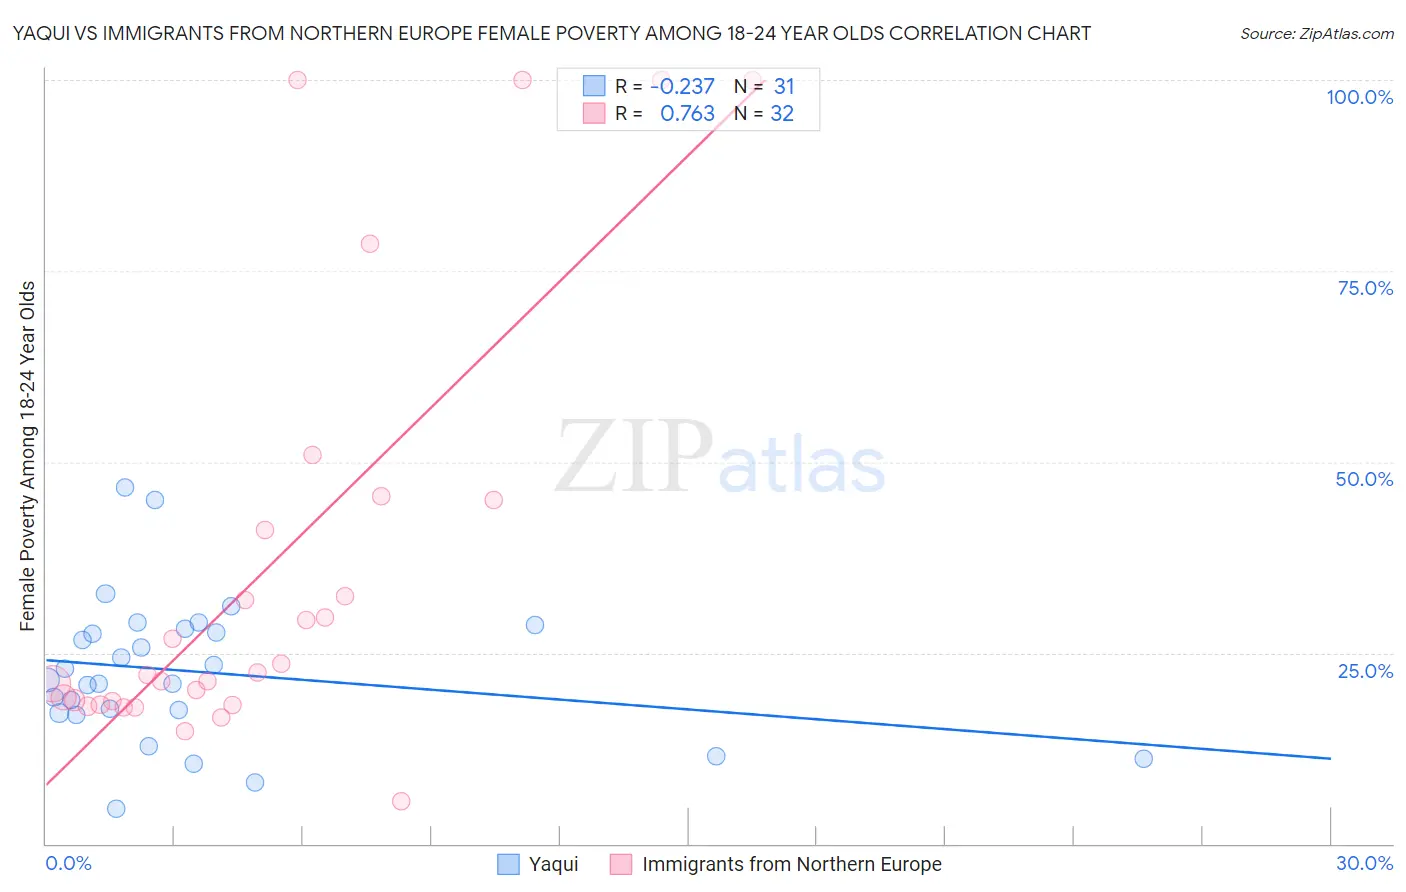 Yaqui vs Immigrants from Northern Europe Female Poverty Among 18-24 Year Olds